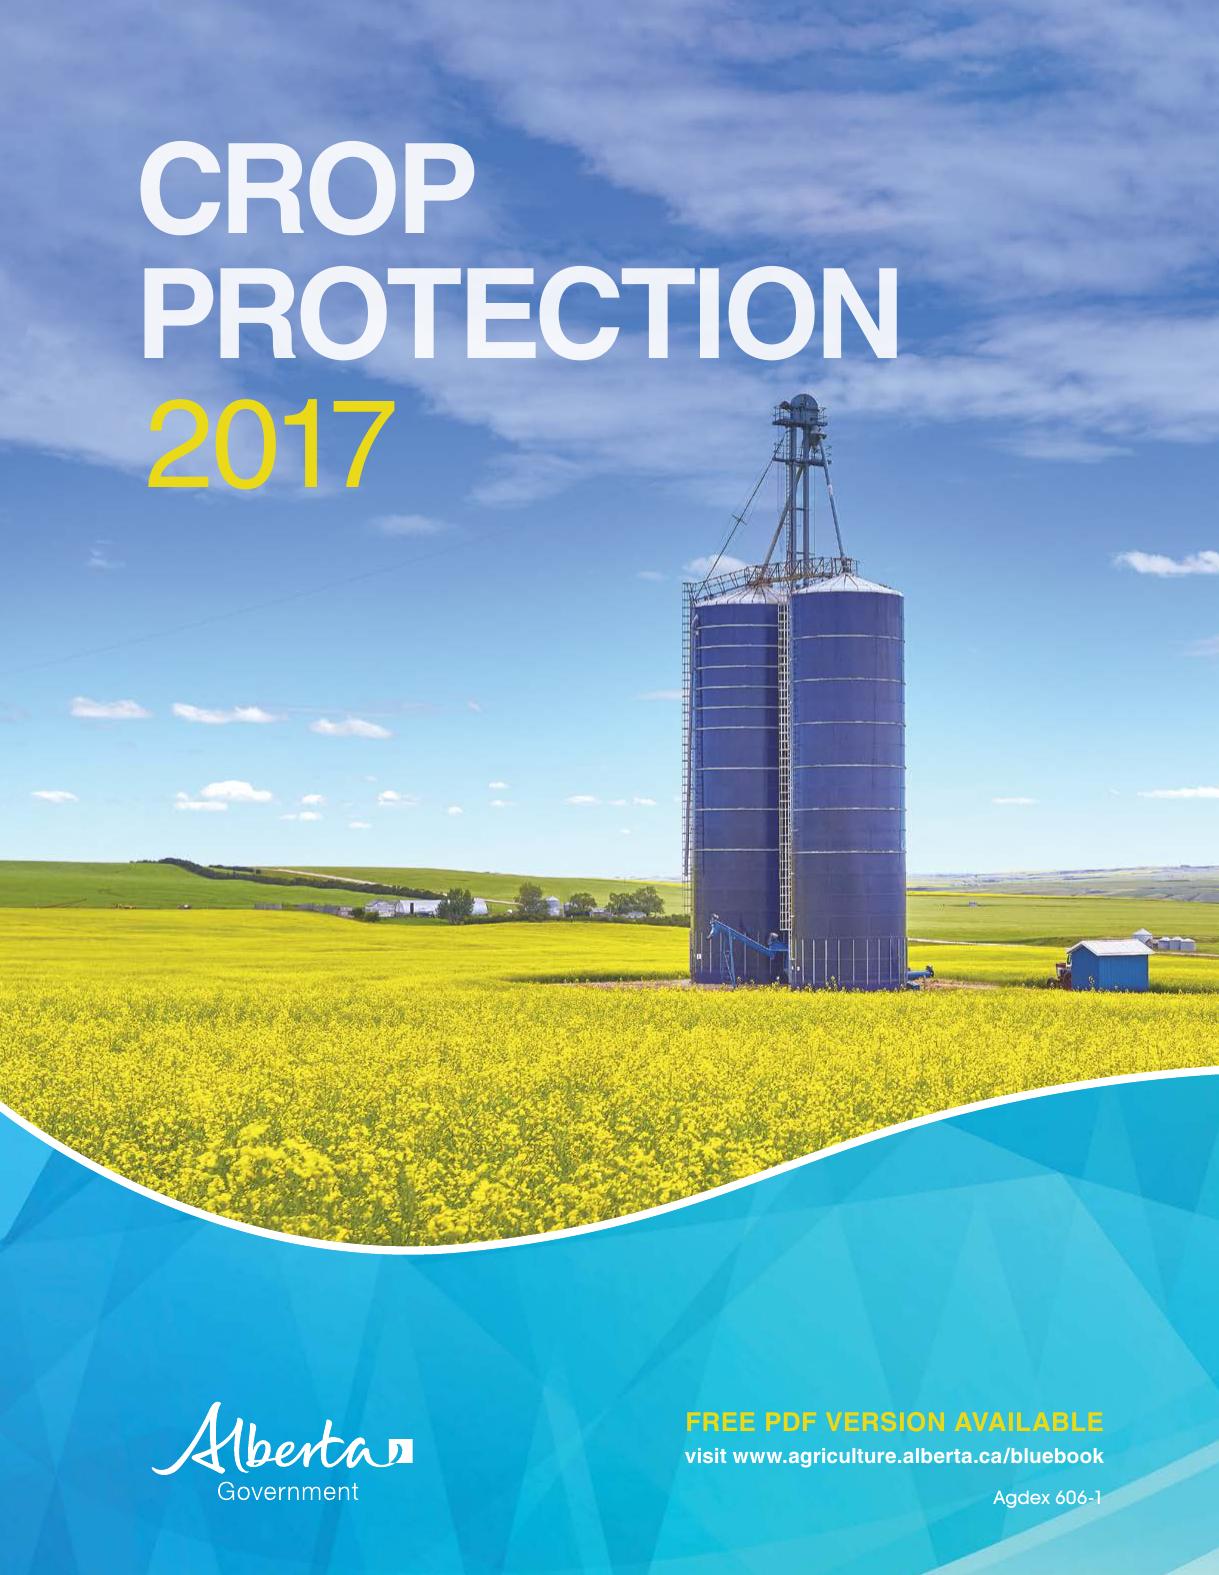 Crop Protection 2017 (Agdex 606-1)